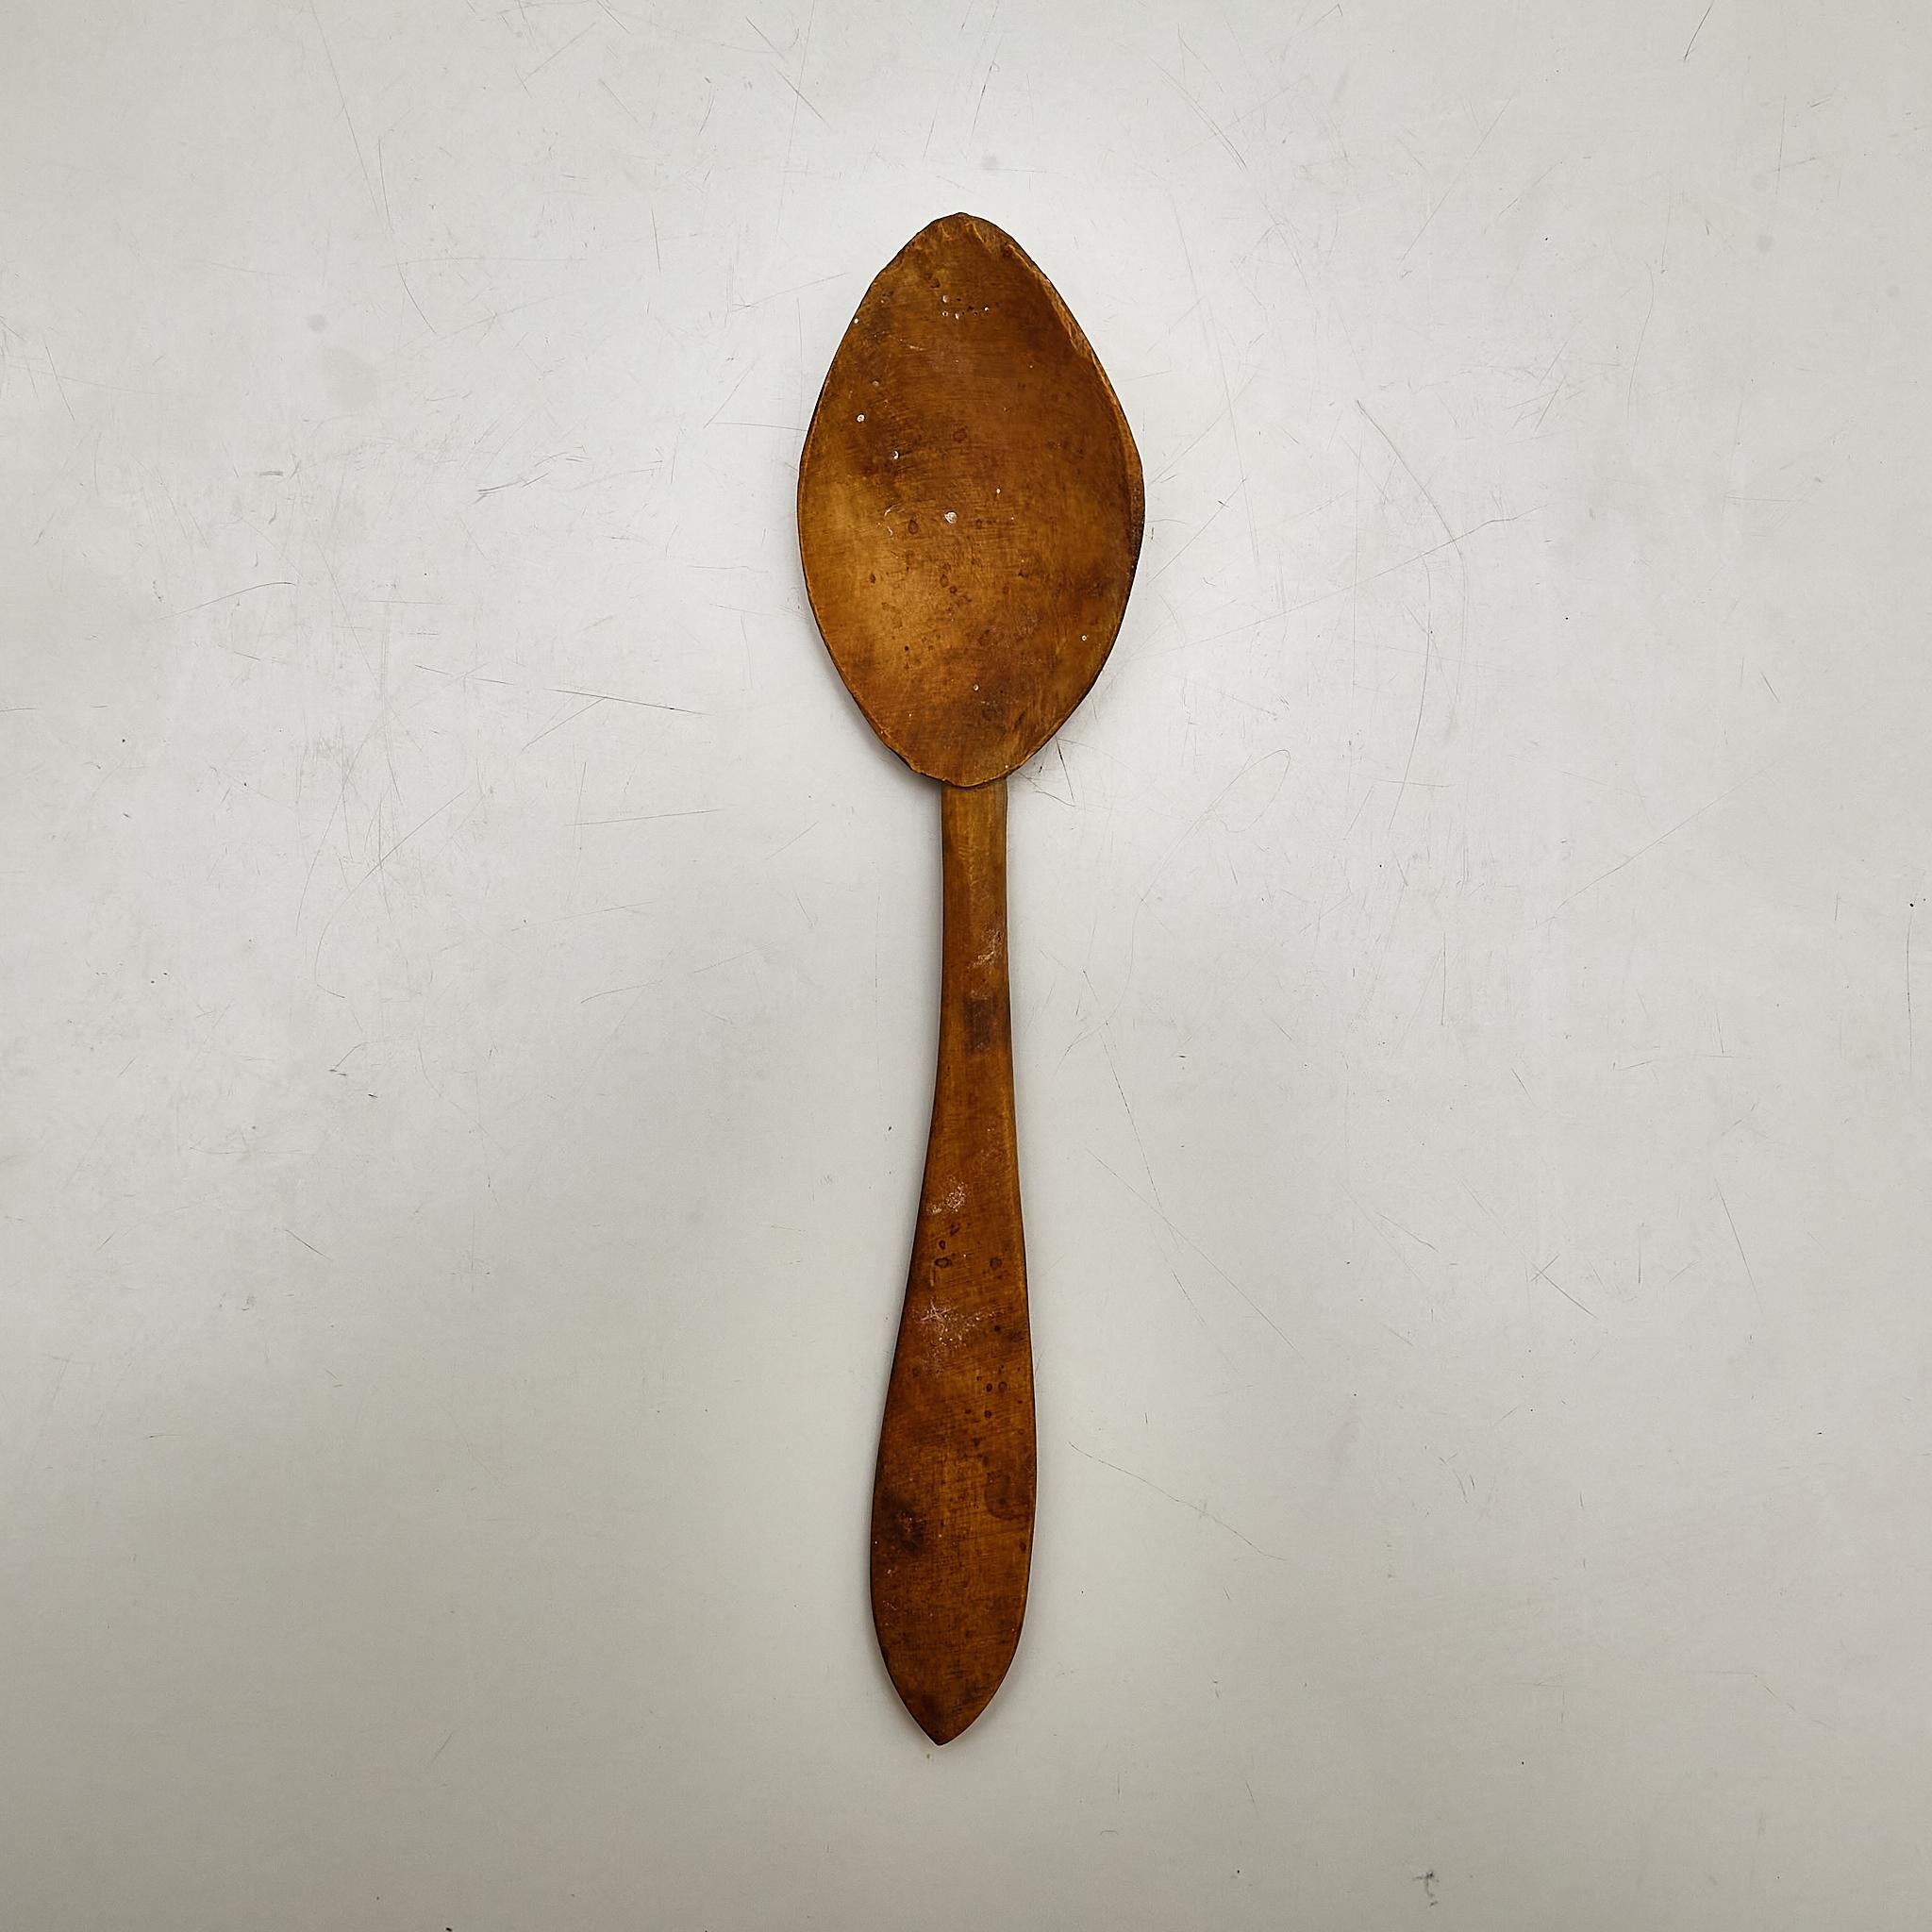 Rustic Primitive Pastor Handmade Wood Spoon

Manufactured in Spain, circa 1930.

In original condition with minor wear consistent of age and use, preserving a beautiful patina.

Materials: 
Wood 

Important information regarding color(s) of